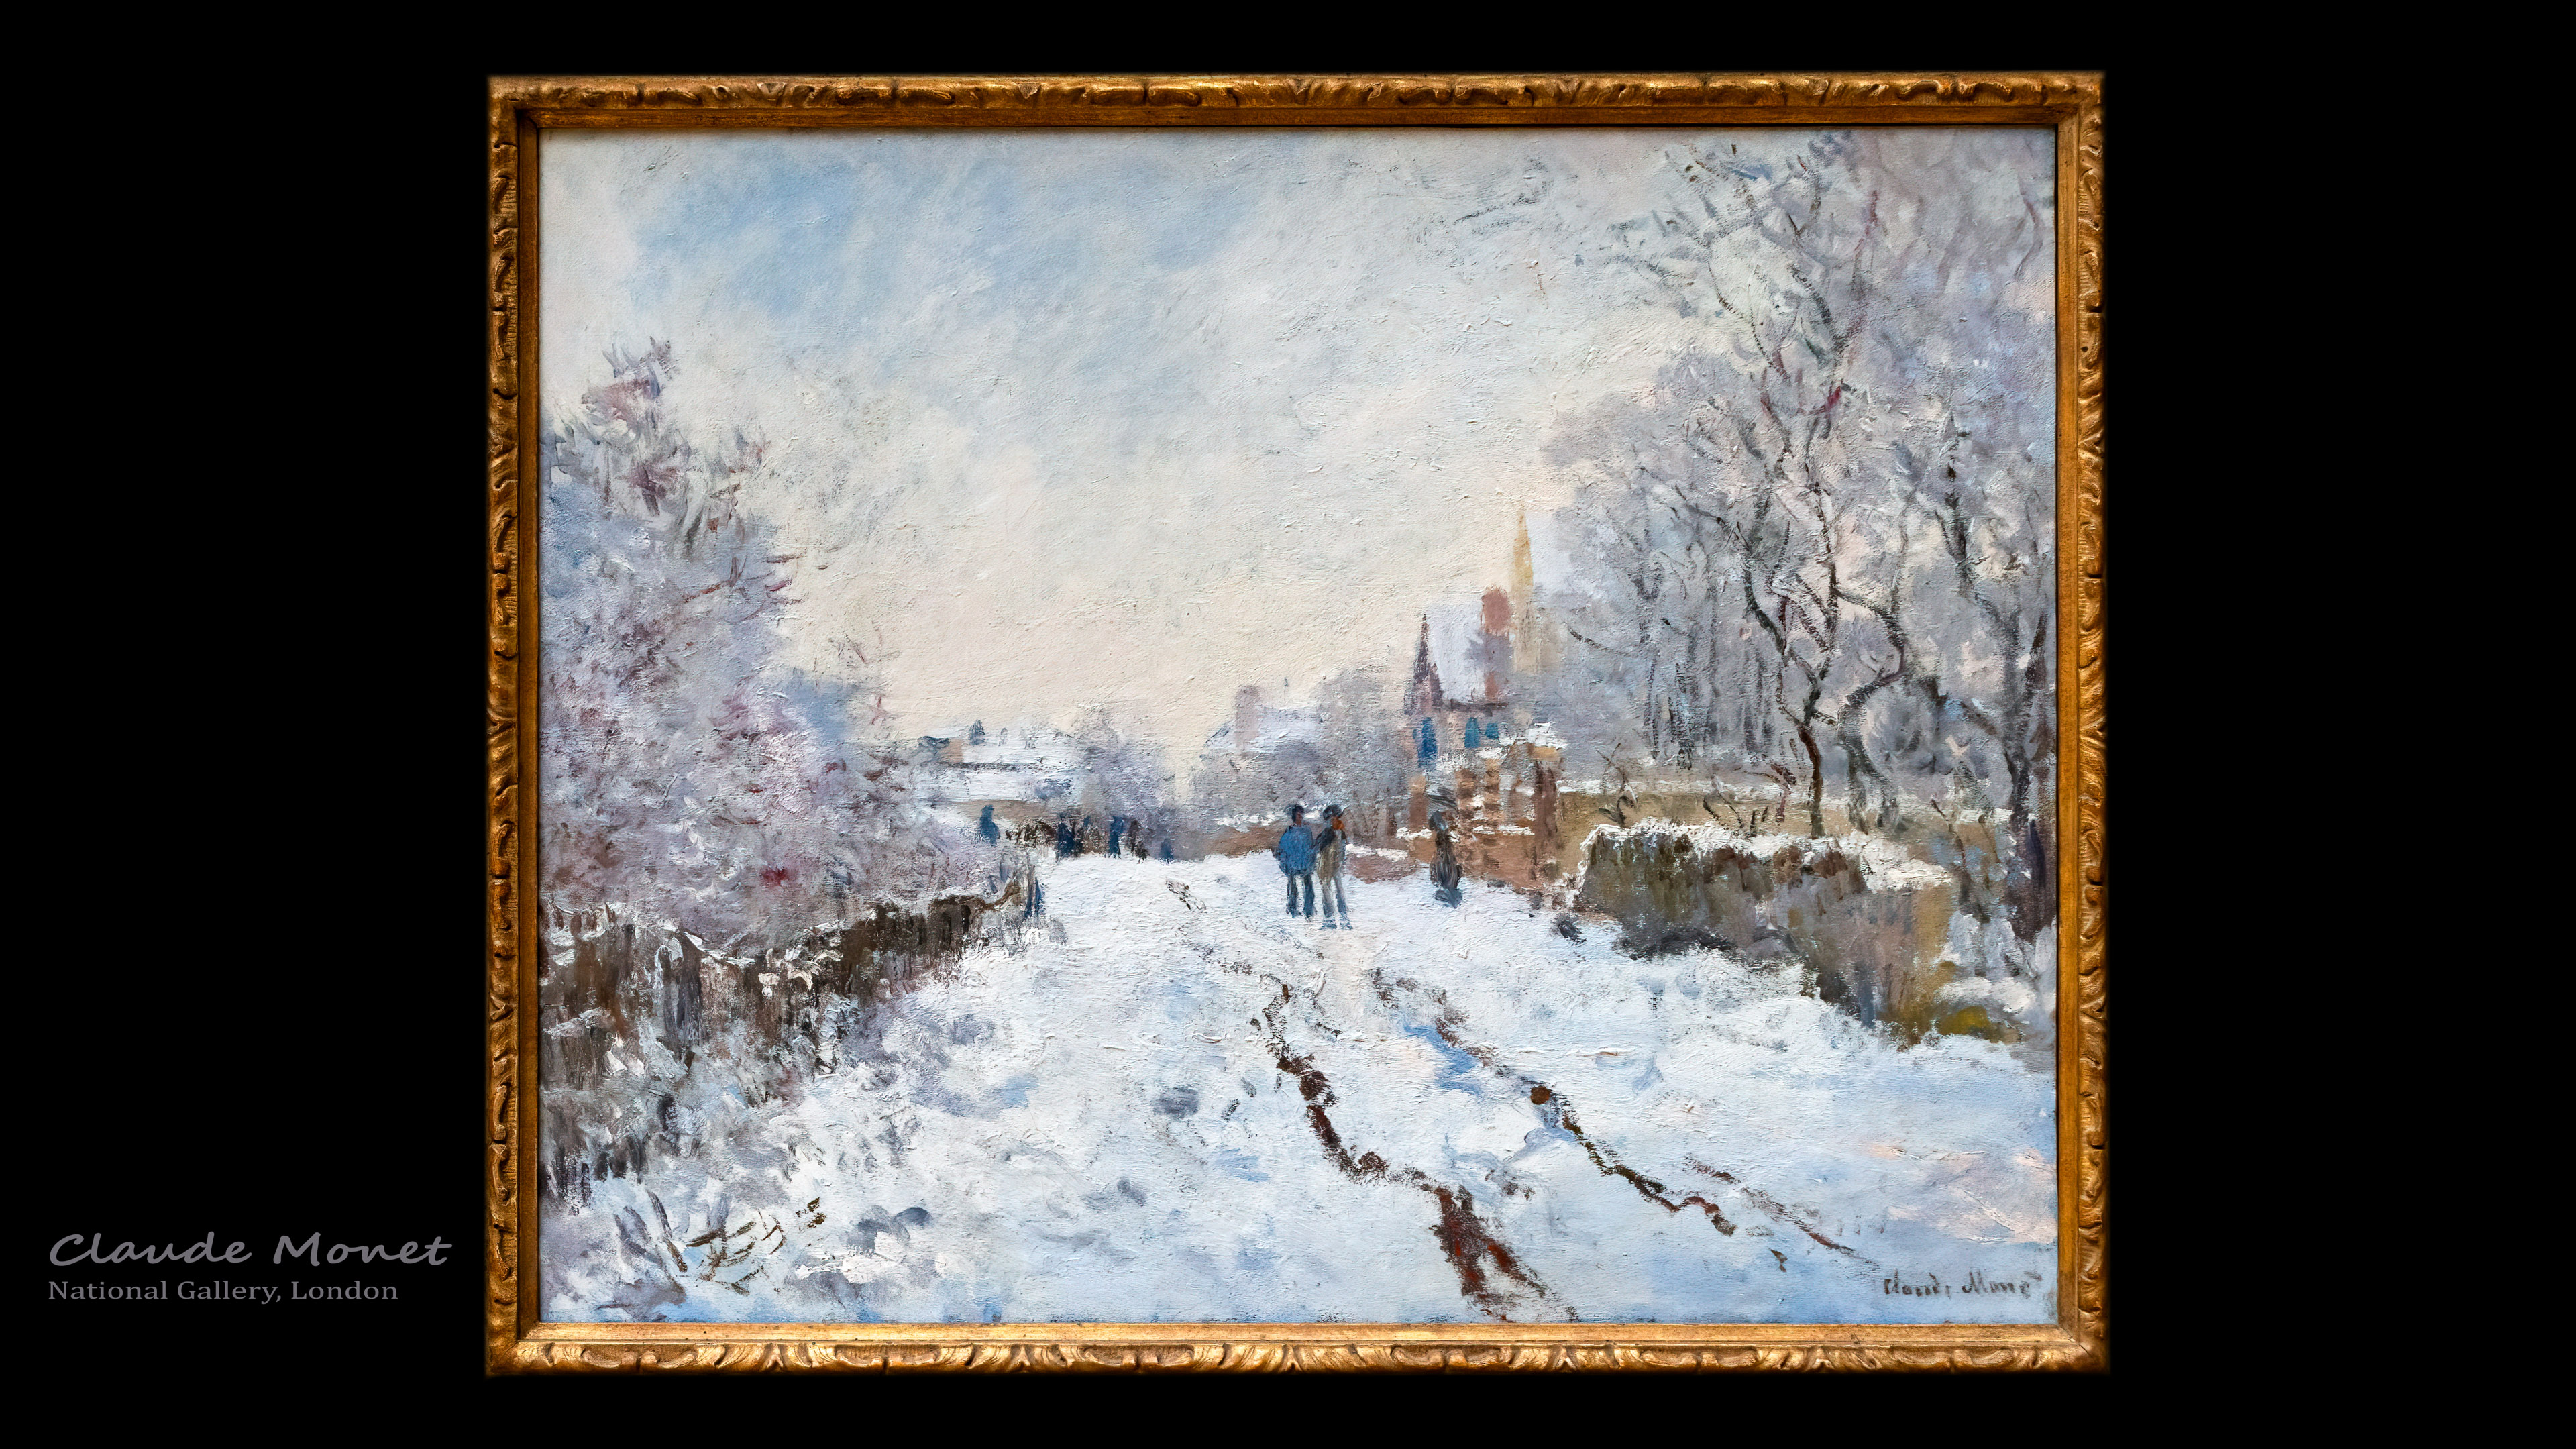 Witness the beauty of impressionism in stunning detail with our Claude Monet wallpaper 4k.